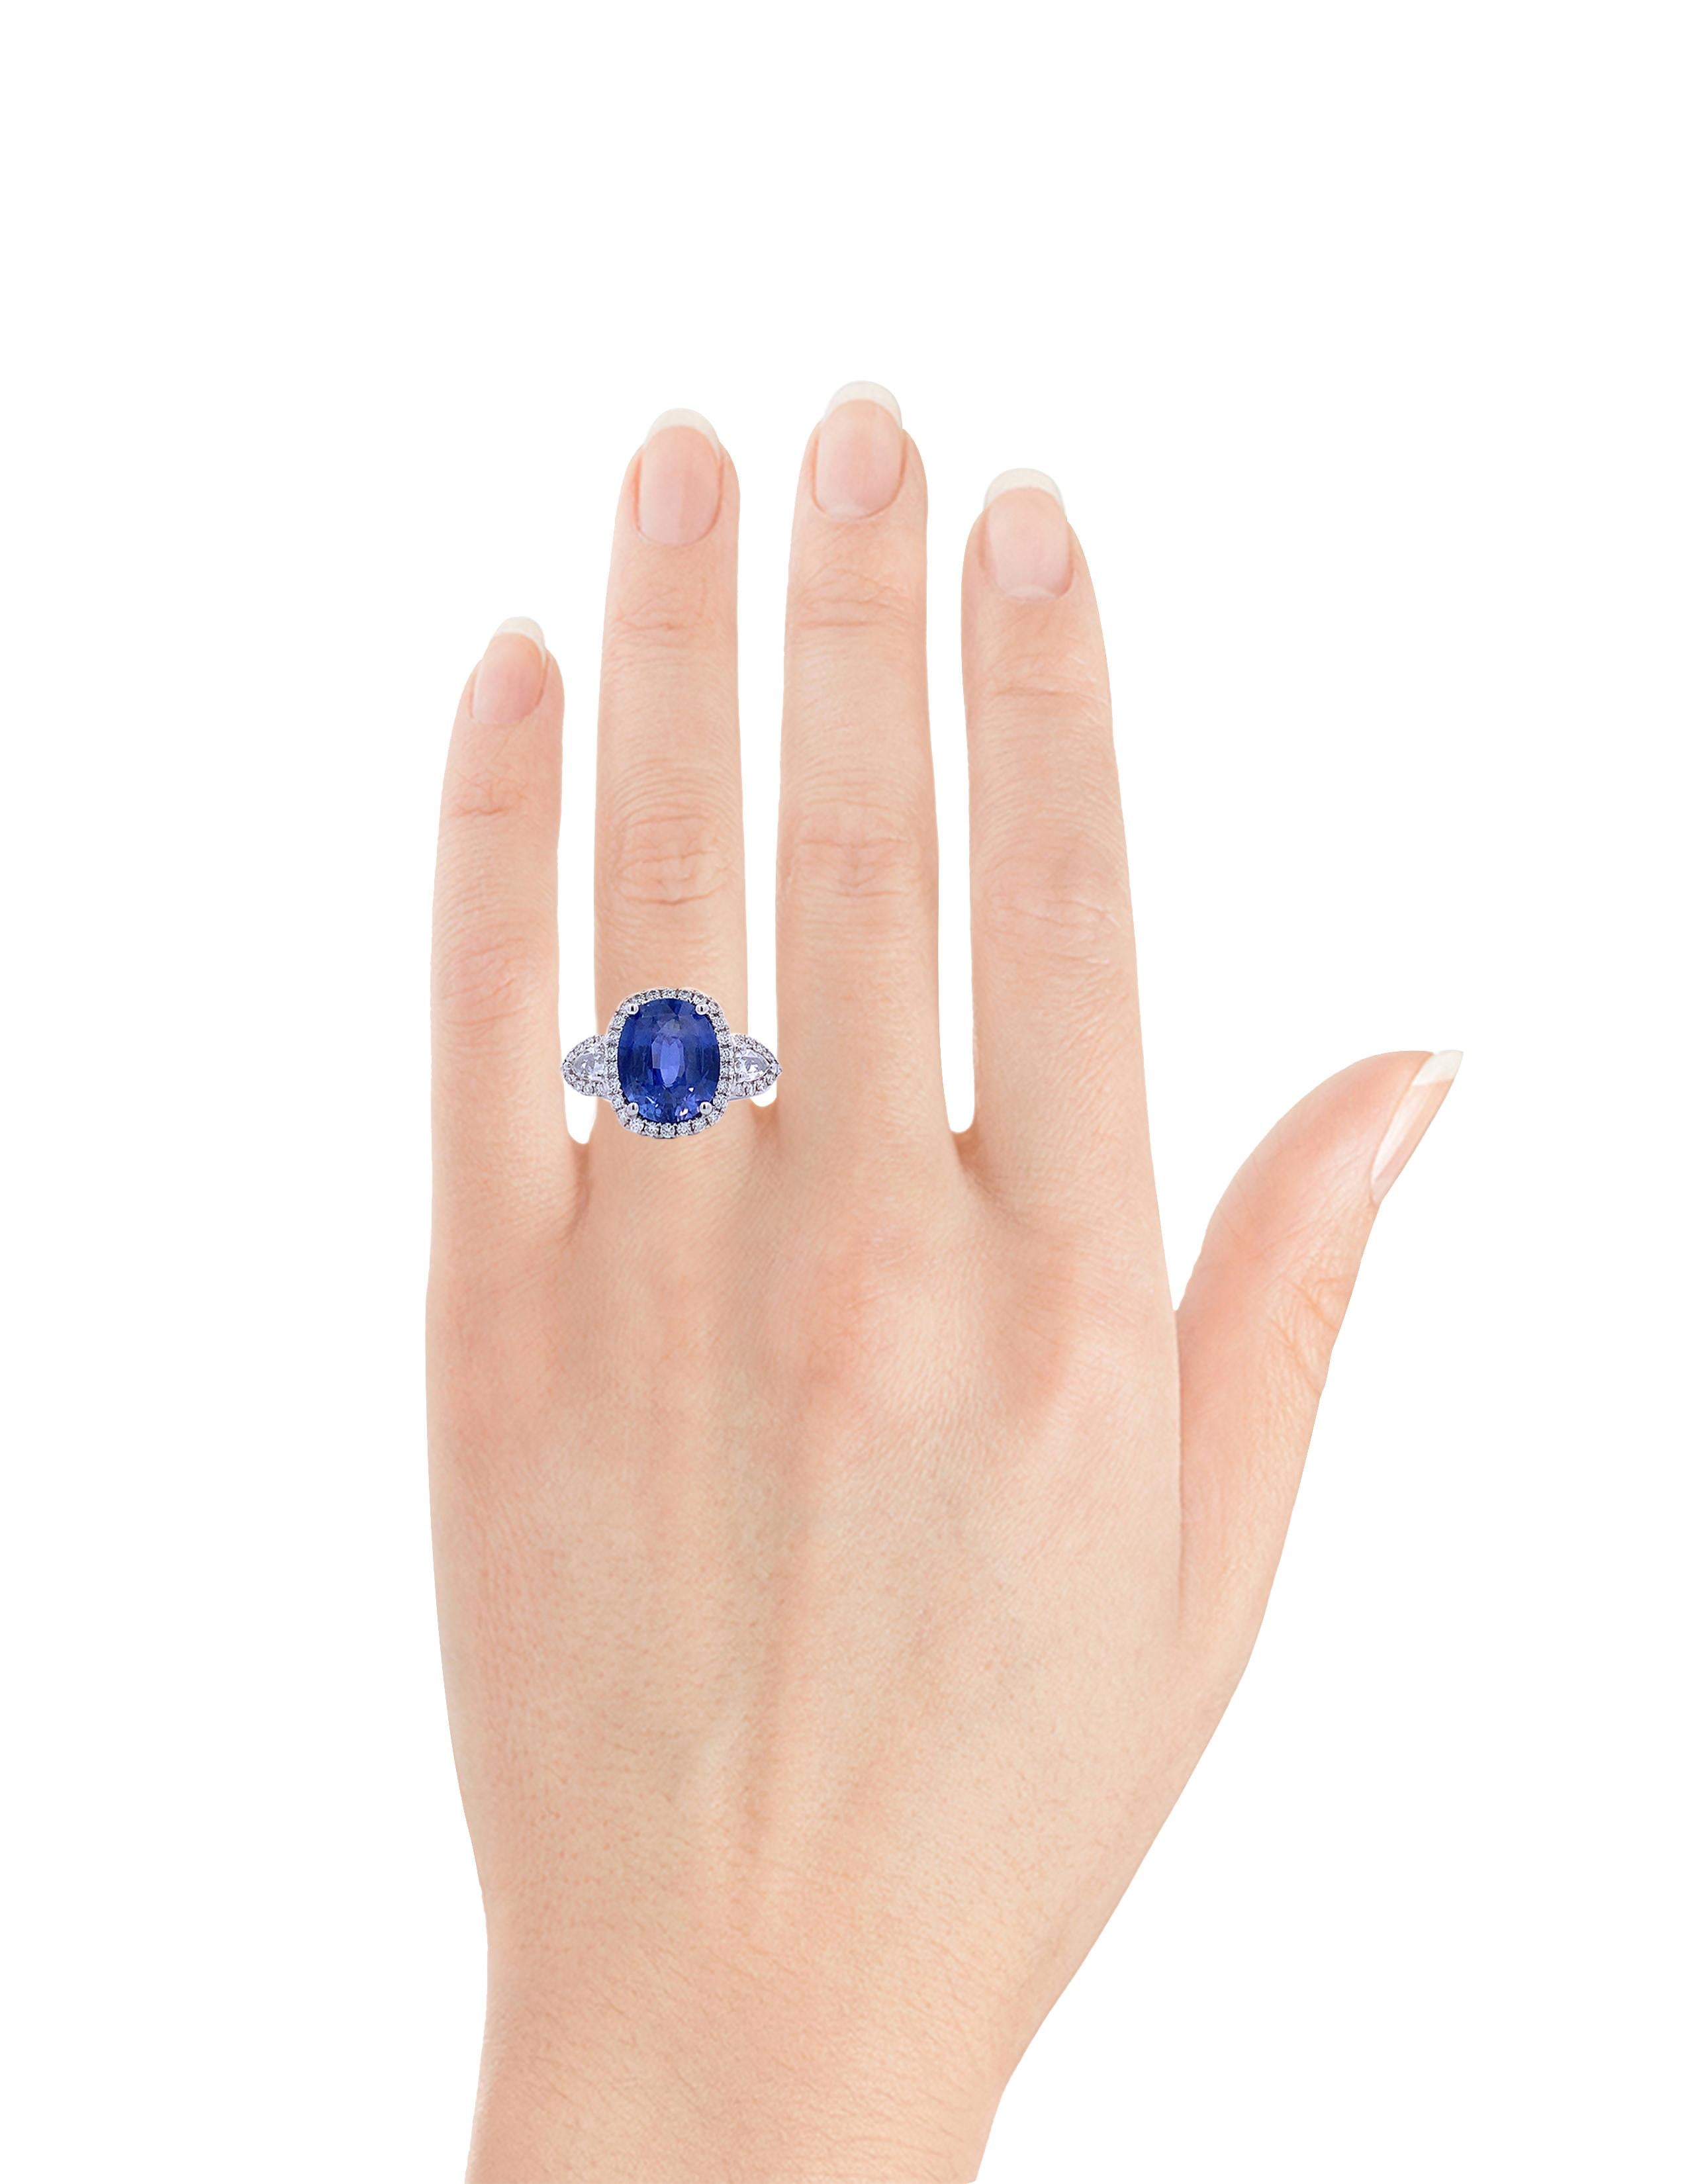 This Fancy Sapphire Ring (#17477) is the perfect choice for any special occasion! It features a stunning 5.55 carat sapphire, surrounded by 0.88 carats of dazzling diamonds set in 18k white gold. This ring is GIA certified, ensuring that the highest